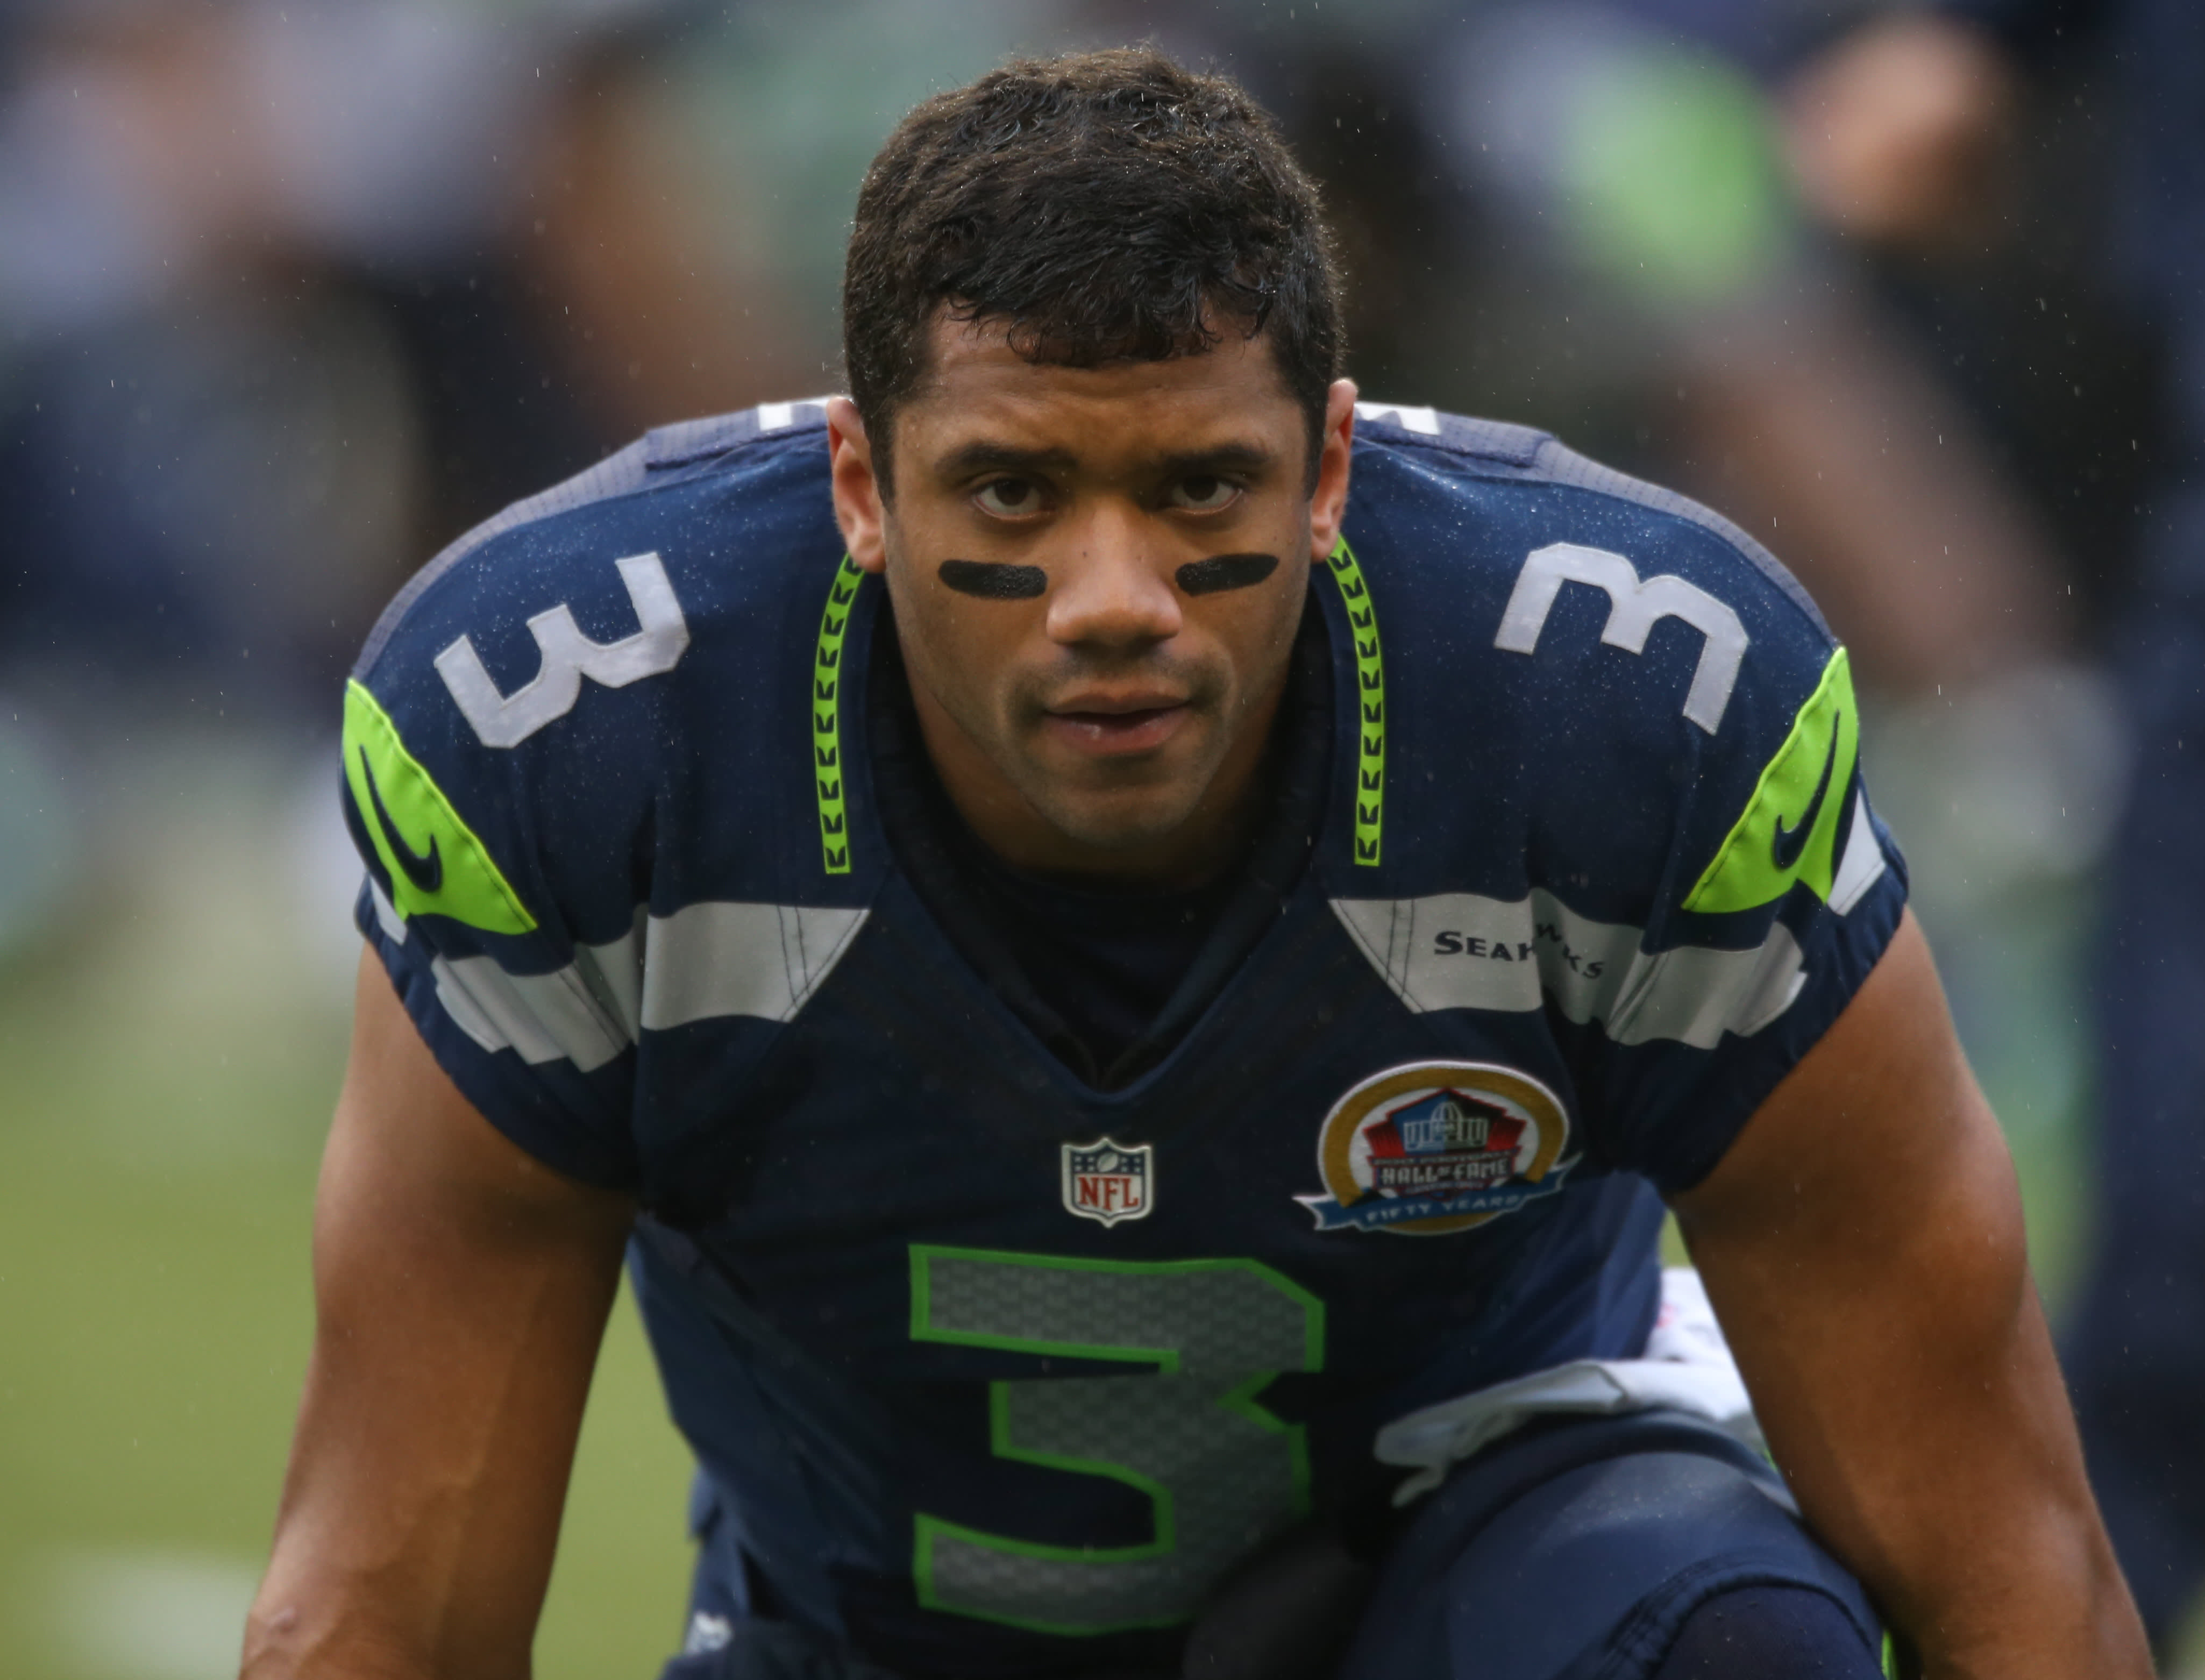 NFL's Russell Wilson spends at least 1 million a year on health